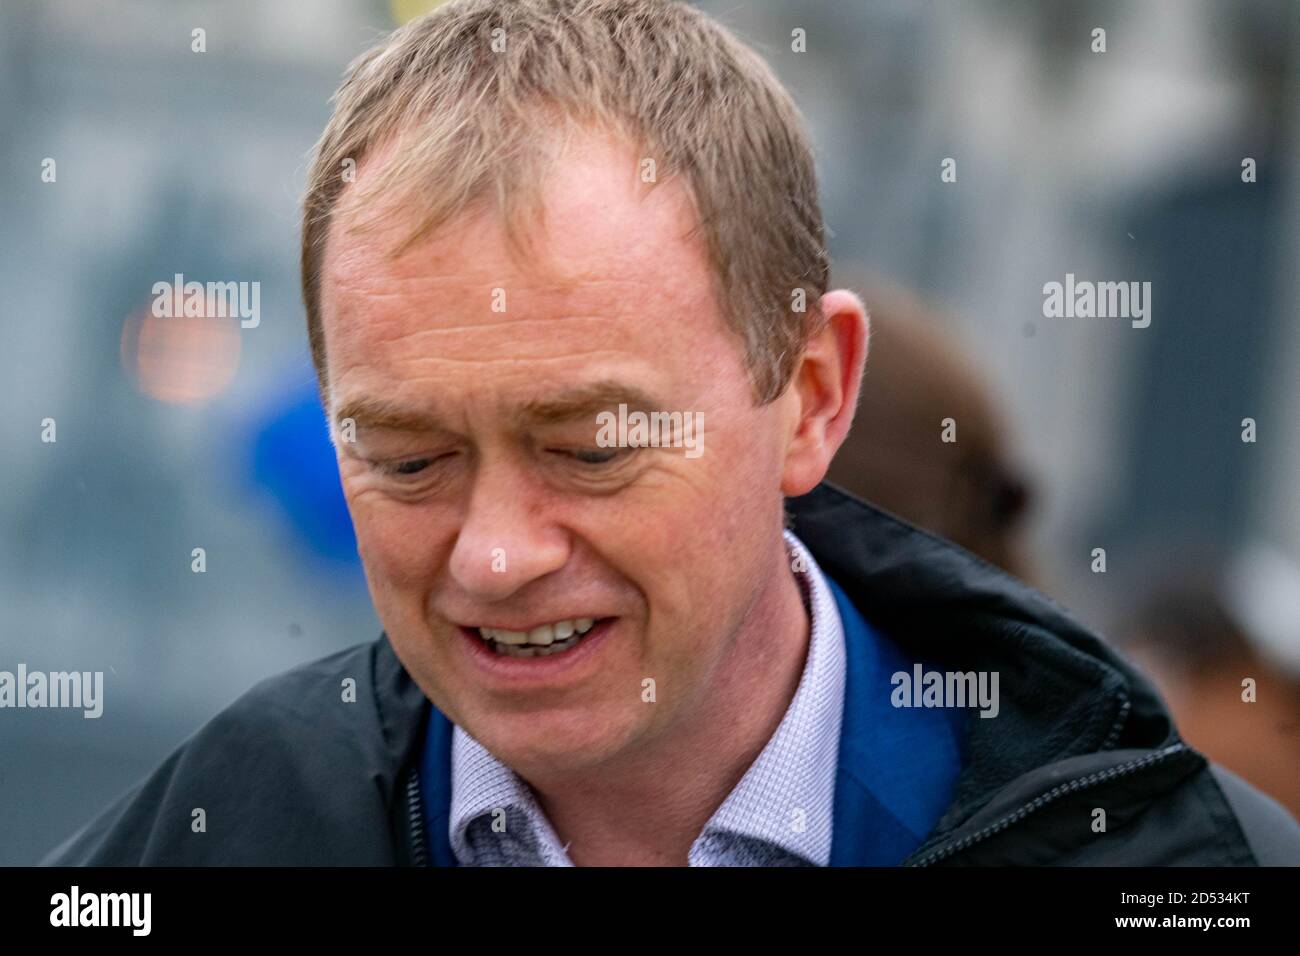 Tim Farron Member of Parliament for Westmorland and Lonsdale former leader of the Liberal Democrat party Stock Photo